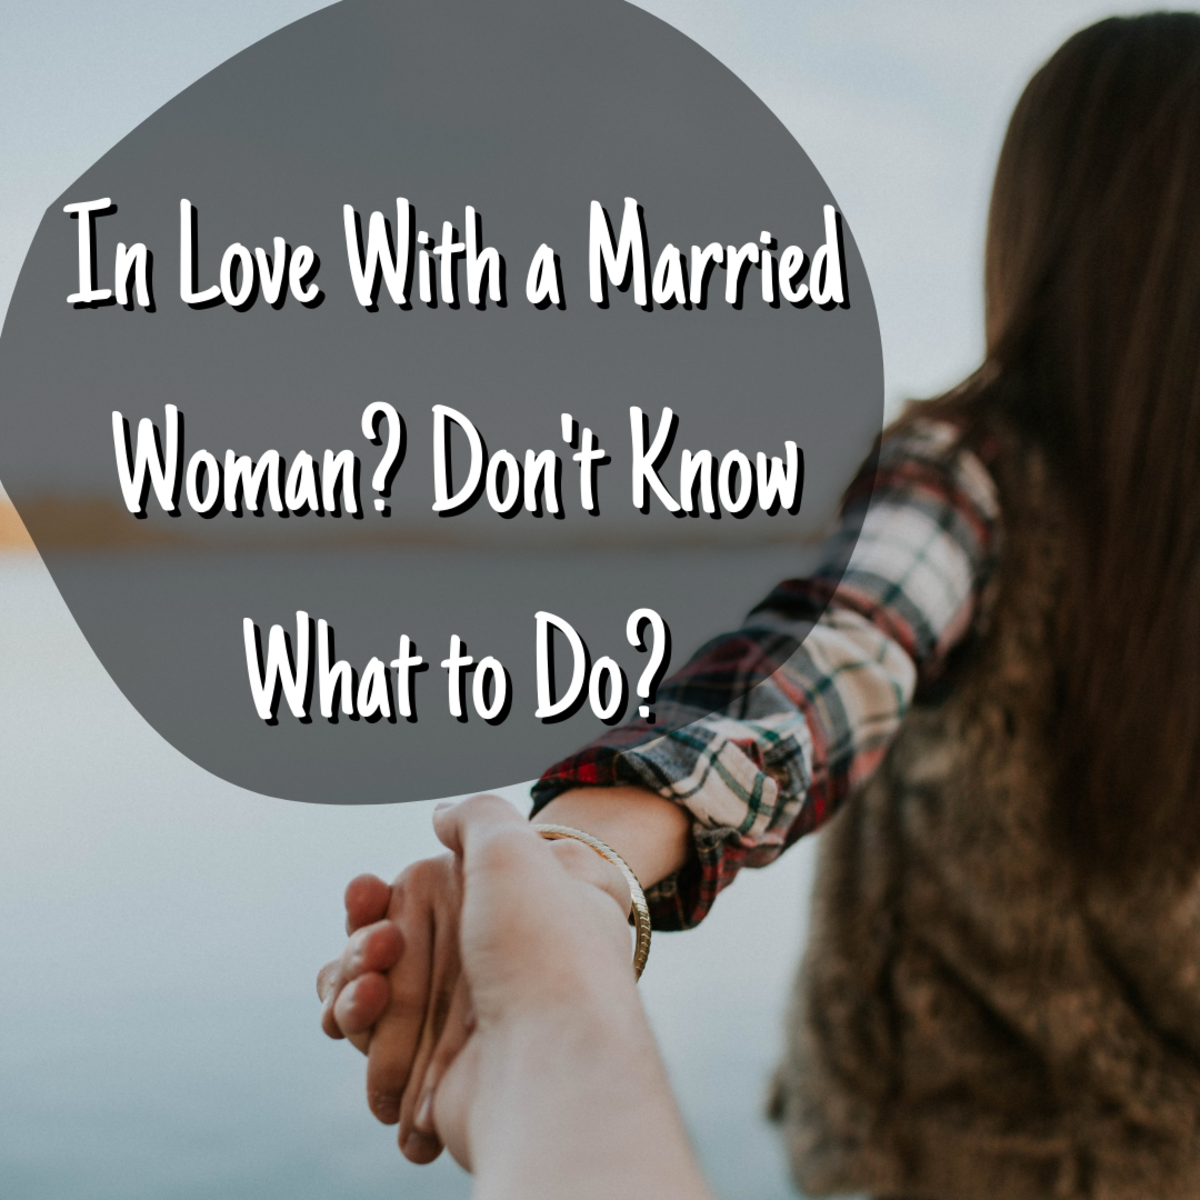 I'm in Love With a Married Woman. What Can I Do?